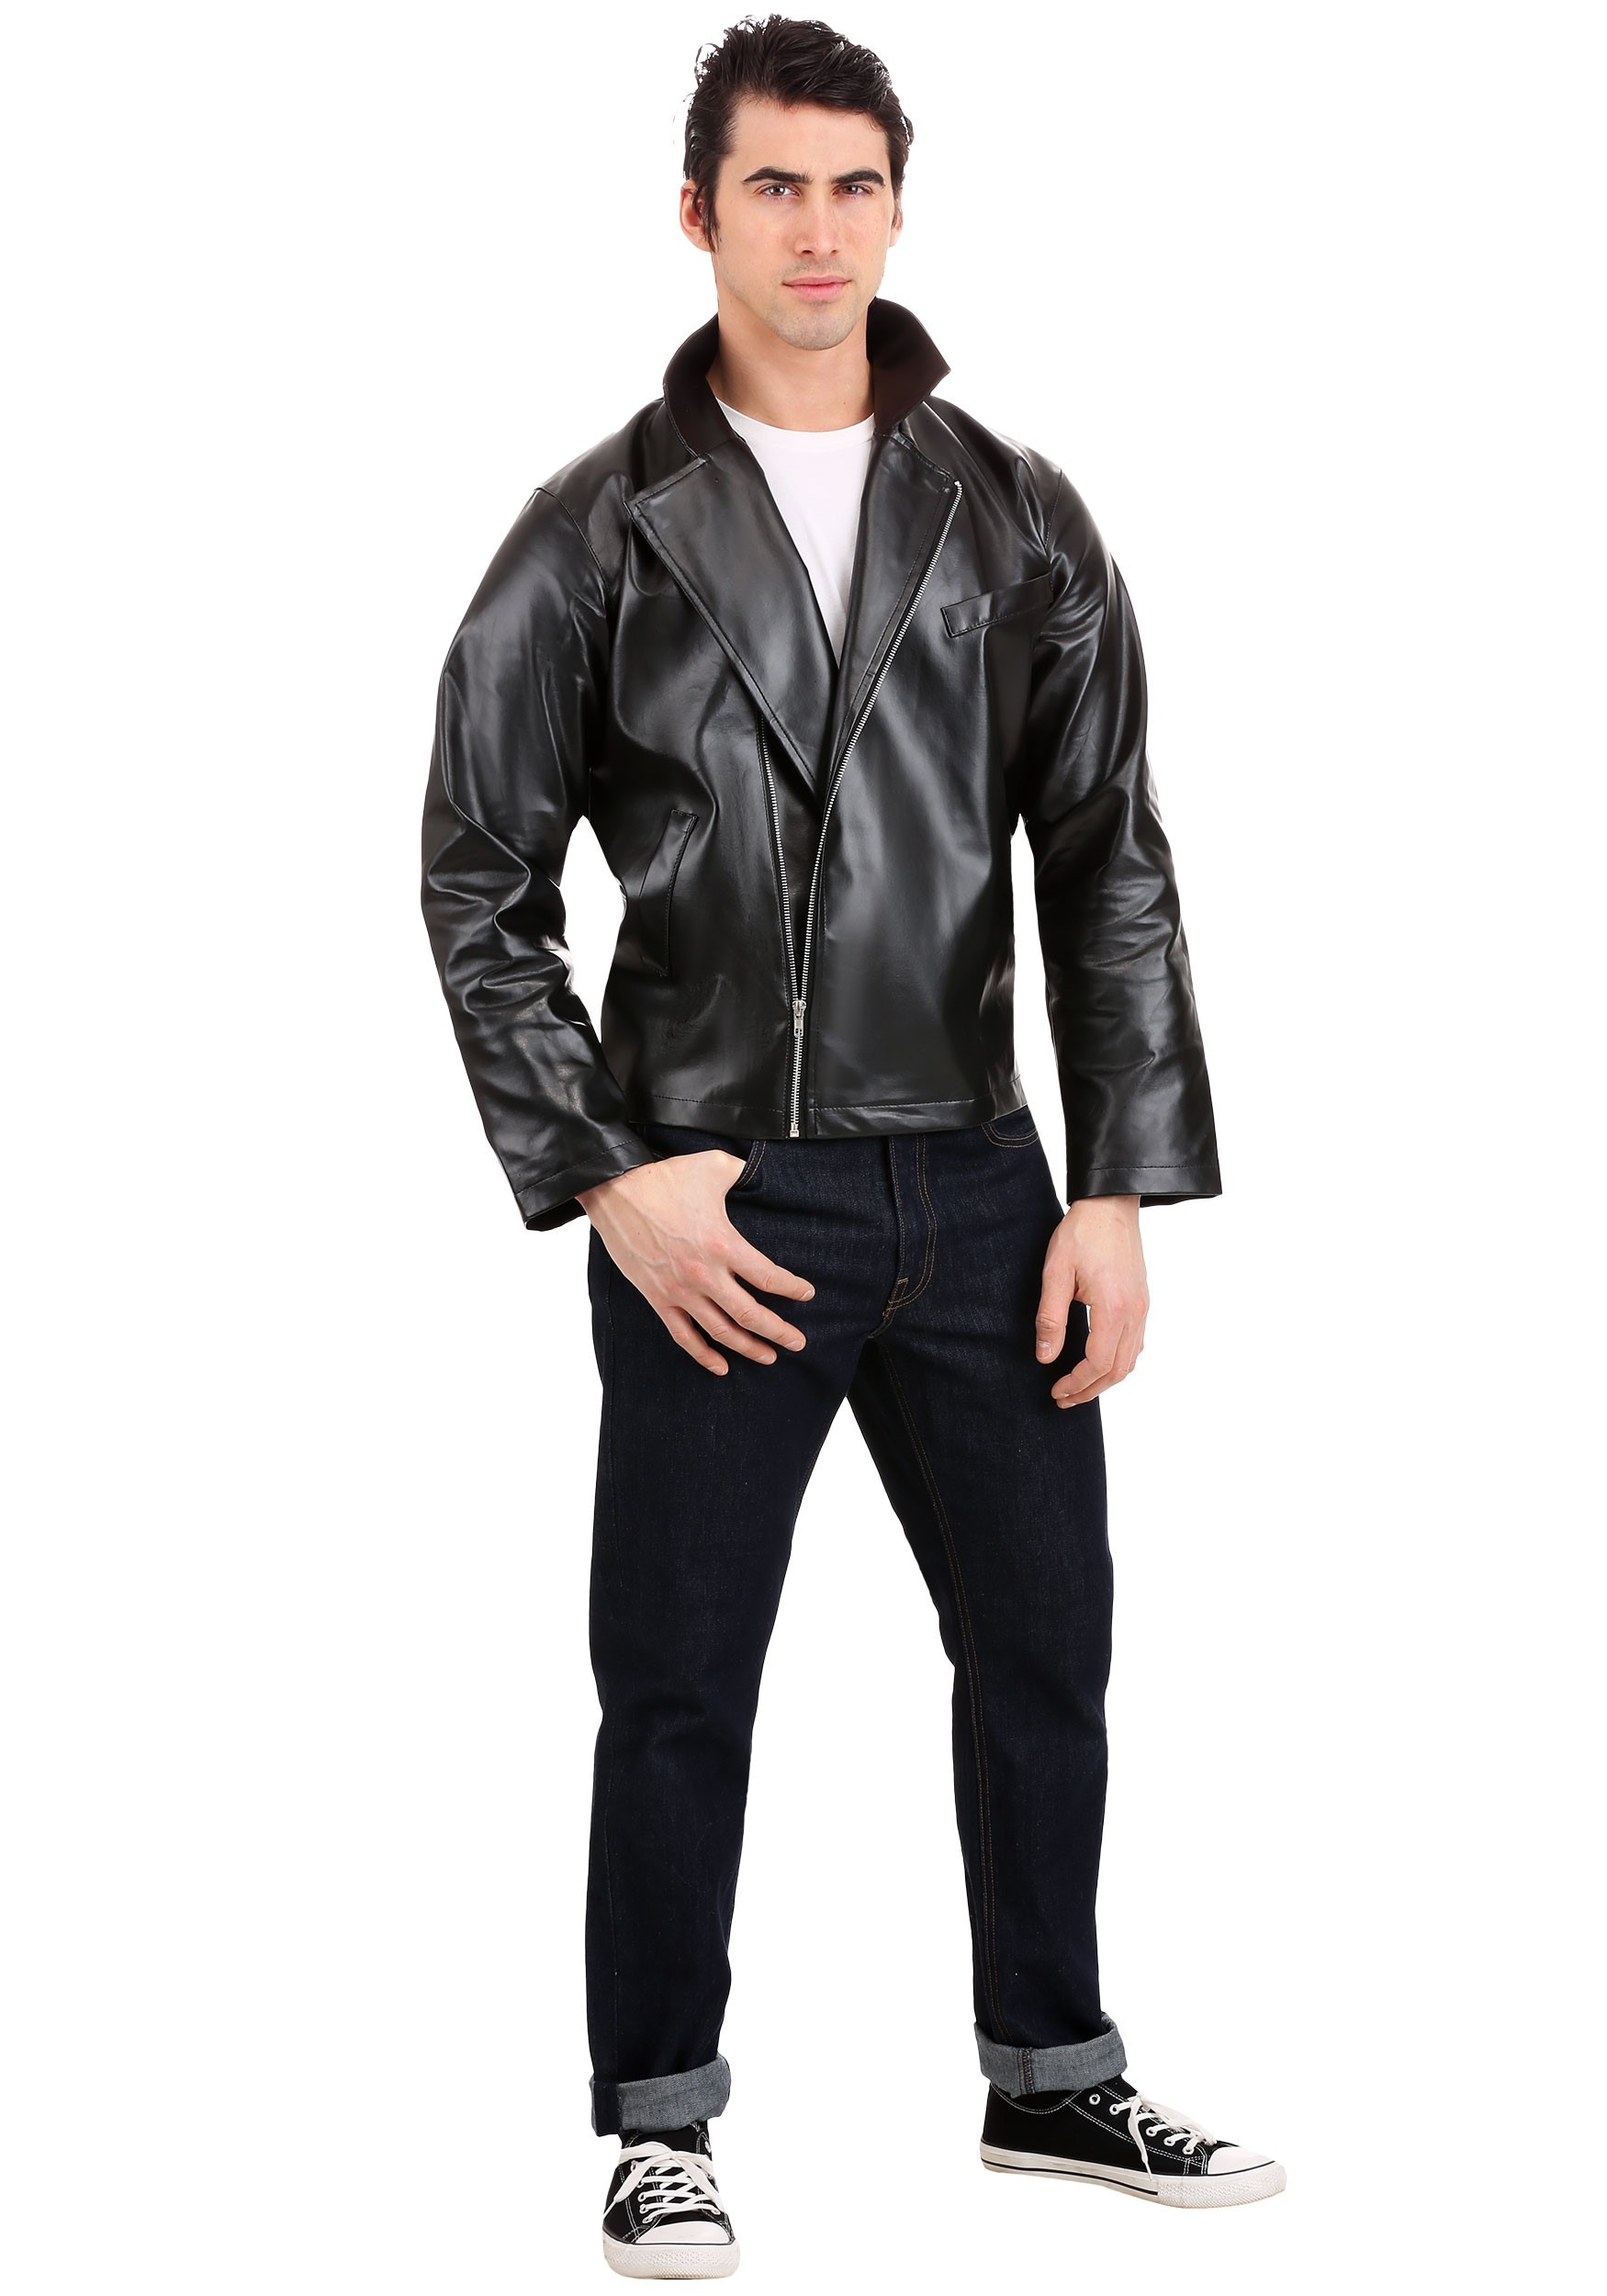 Image of Grease T-Birds Jacket Costume for Men ID GRE6007AD-S